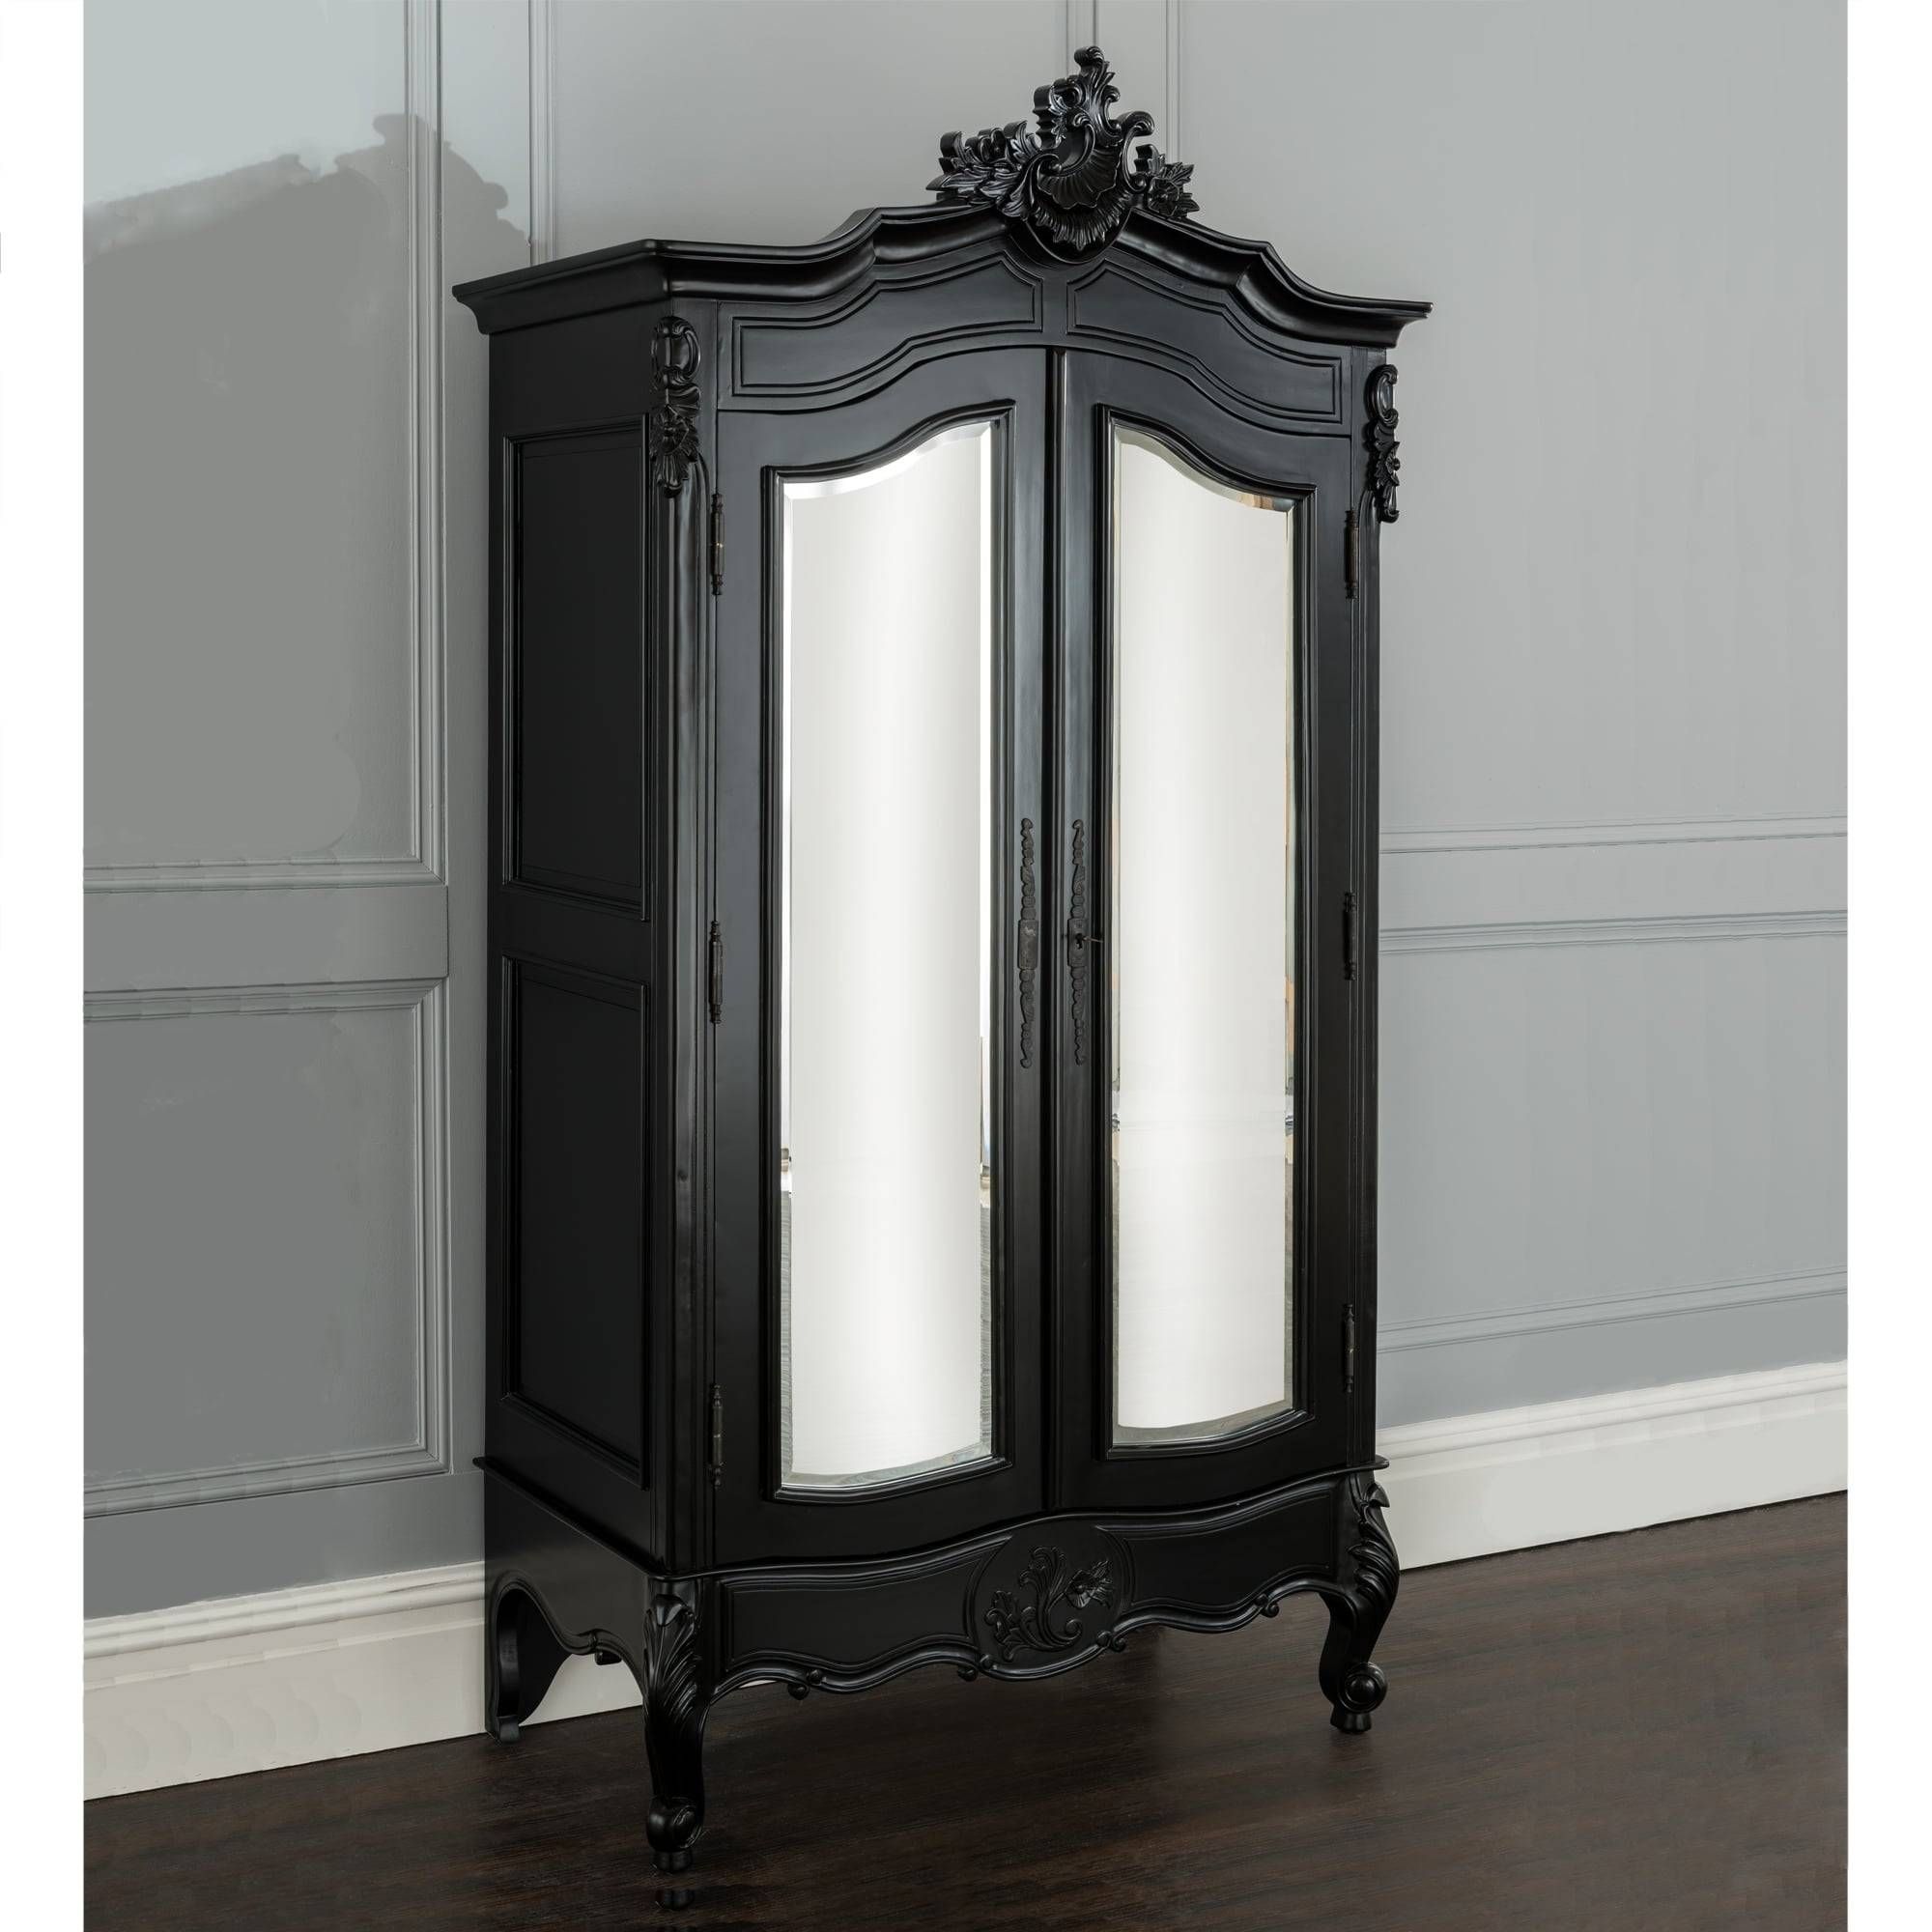 La Rochelle Antique French Wardrobe | Black Furniture Collection Within Black French Style Wardrobes (View 2 of 15)